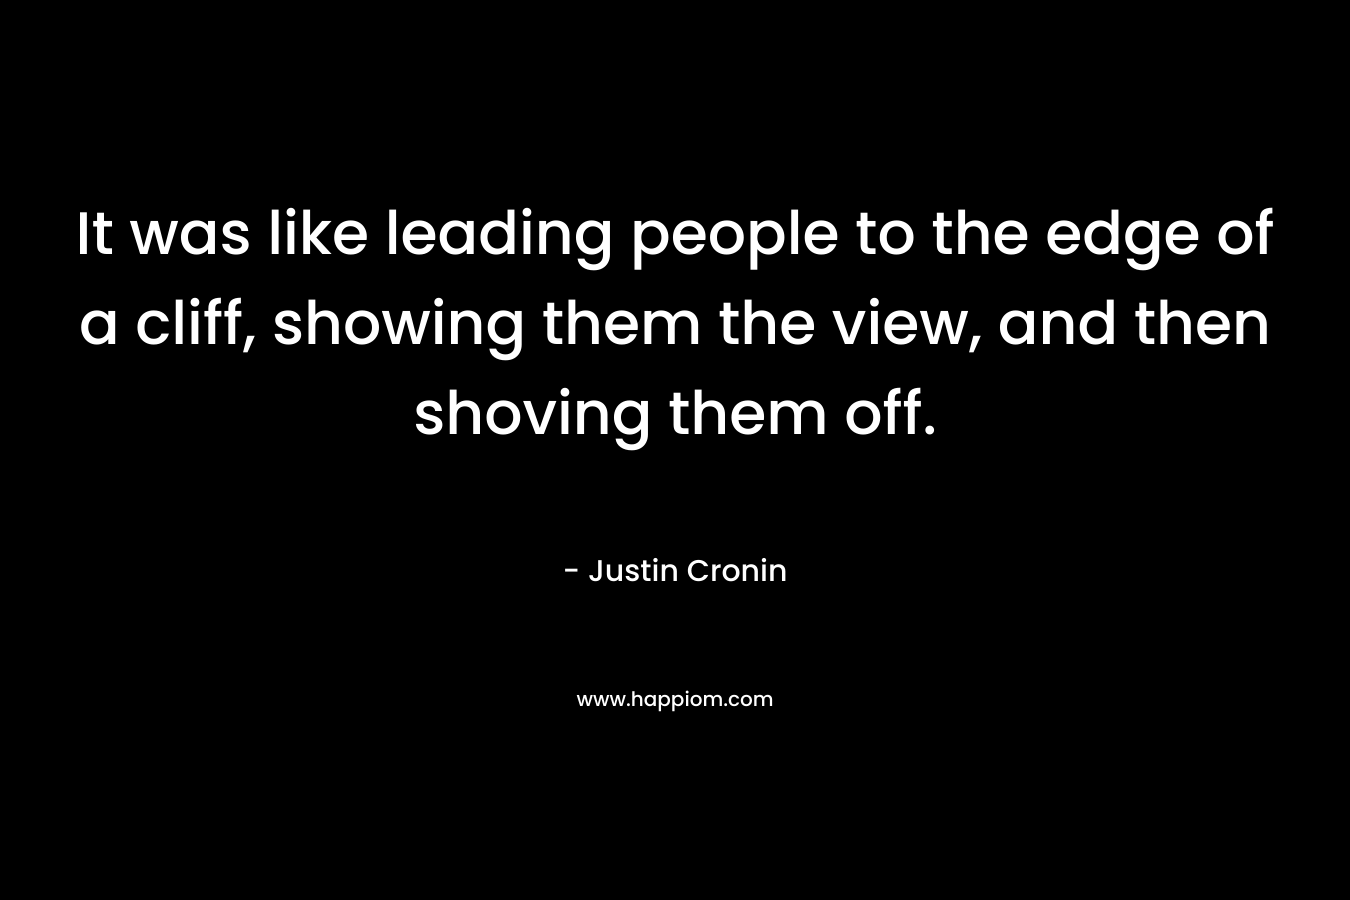 It was like leading people to the edge of a cliff, showing them the view, and then shoving them off. – Justin Cronin